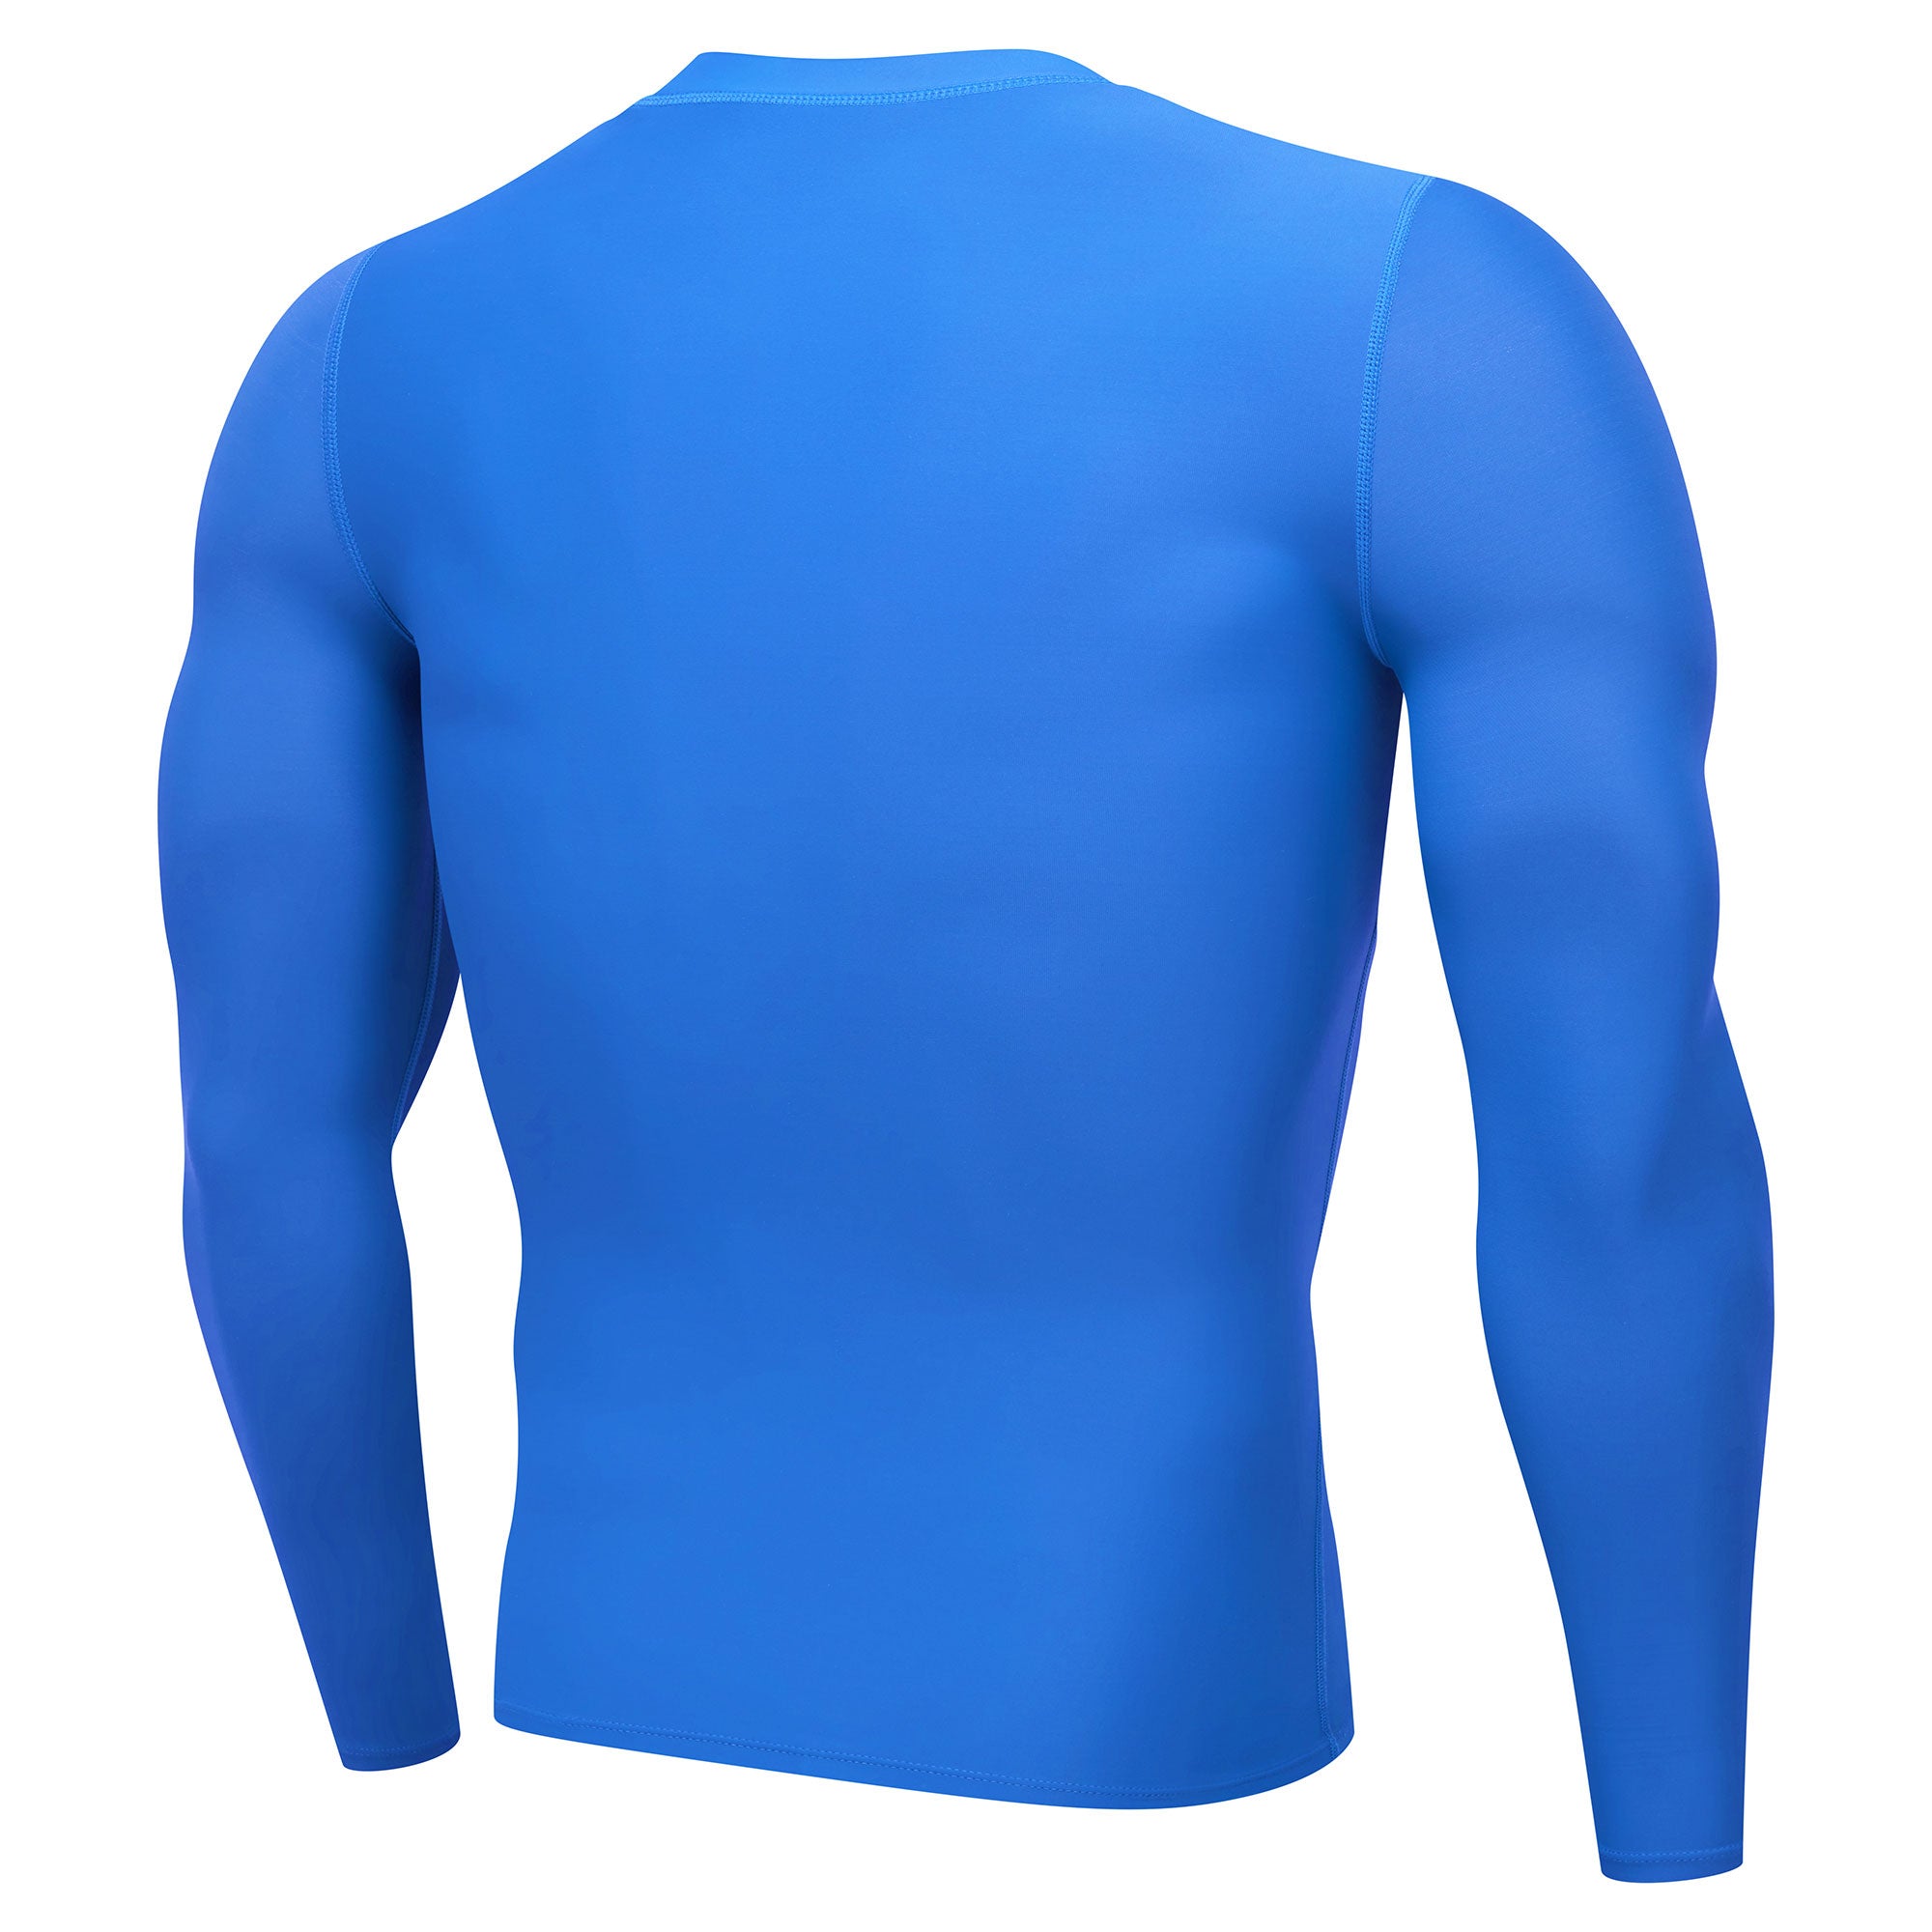 Atak Compression Recovery Long Sleeve Top - Youth - Royal